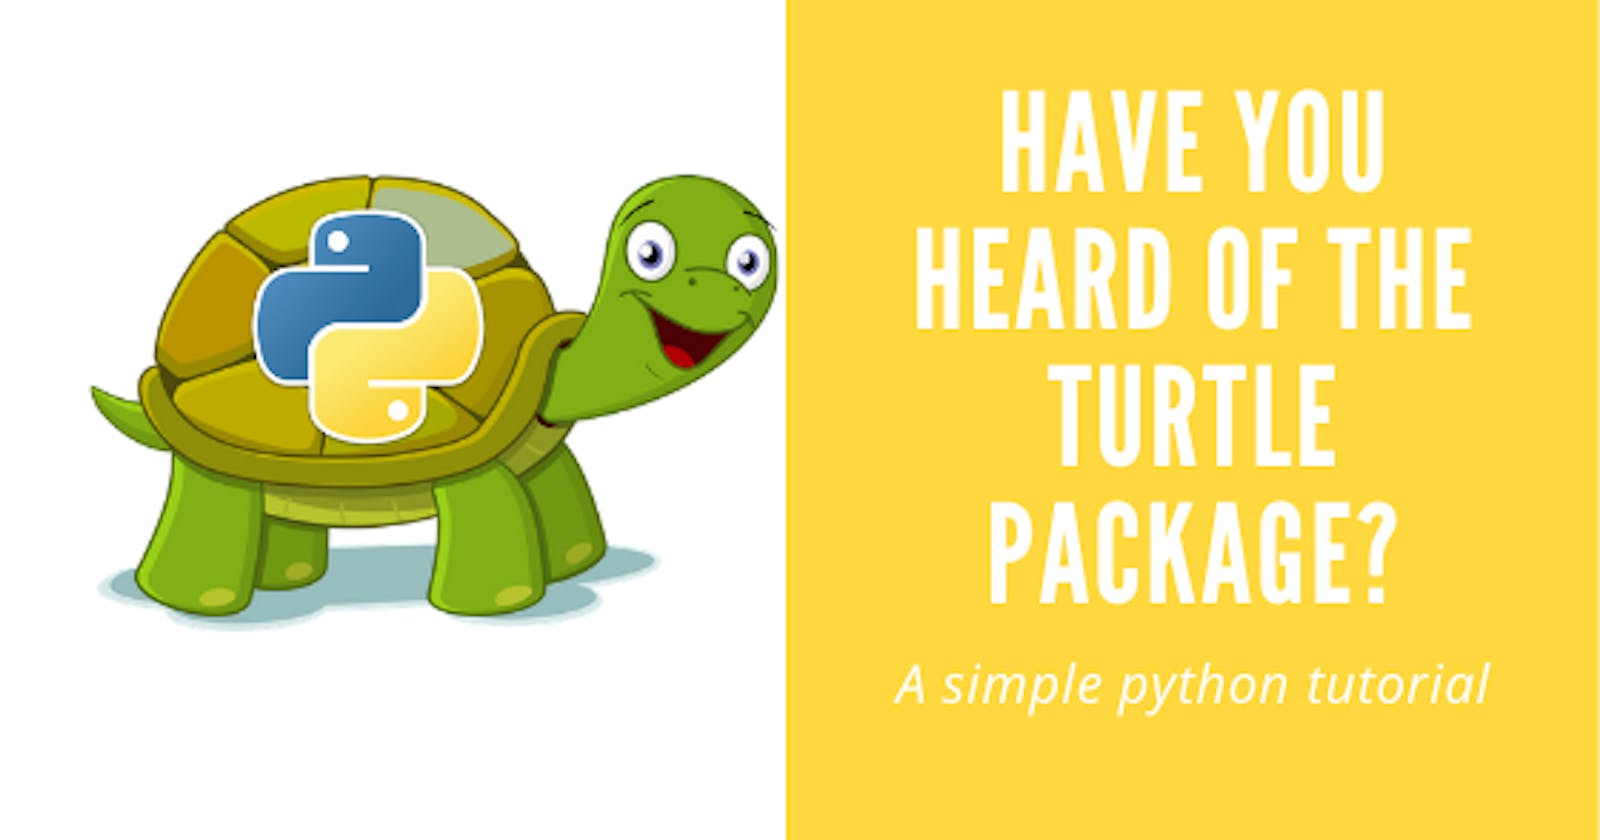 Learn how to wish Merry Christmas using Python Turtle Program